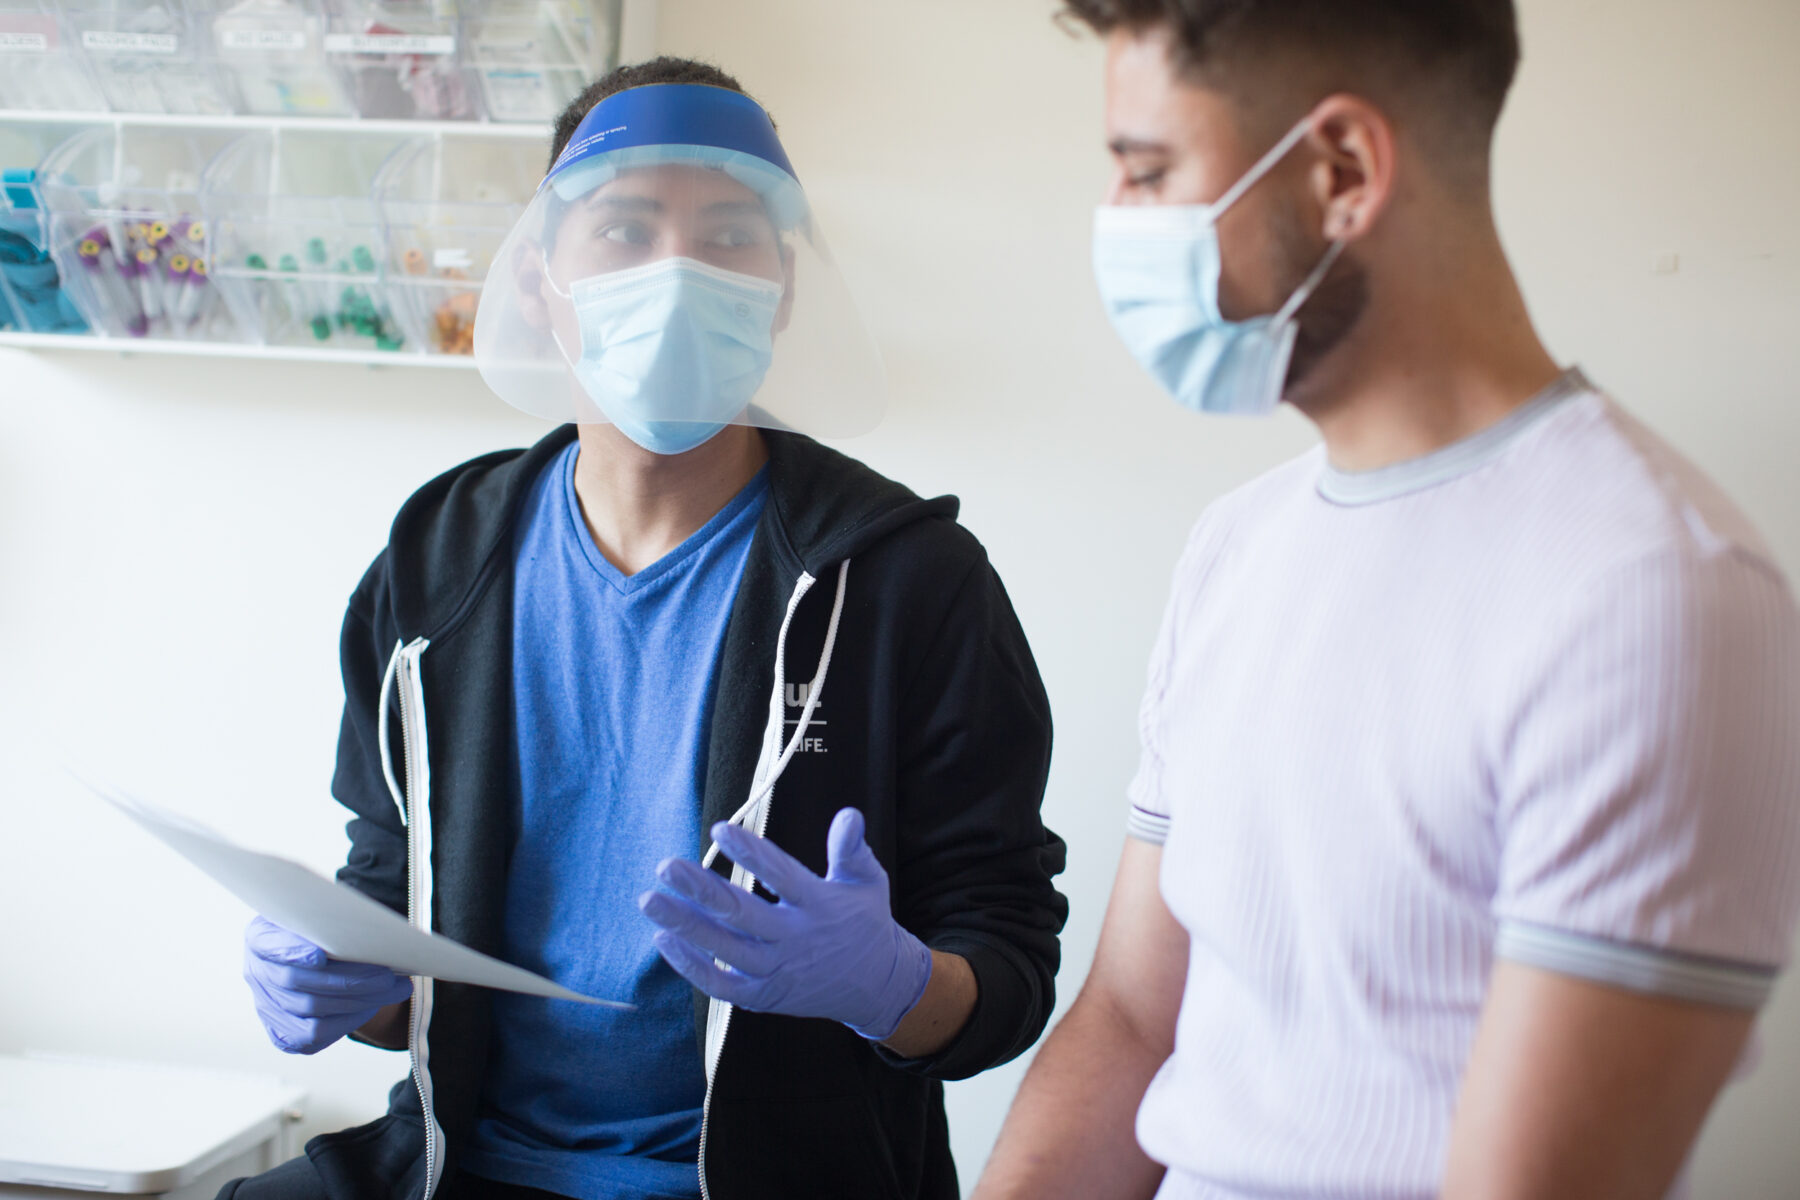 Person receiving health care wearing mask